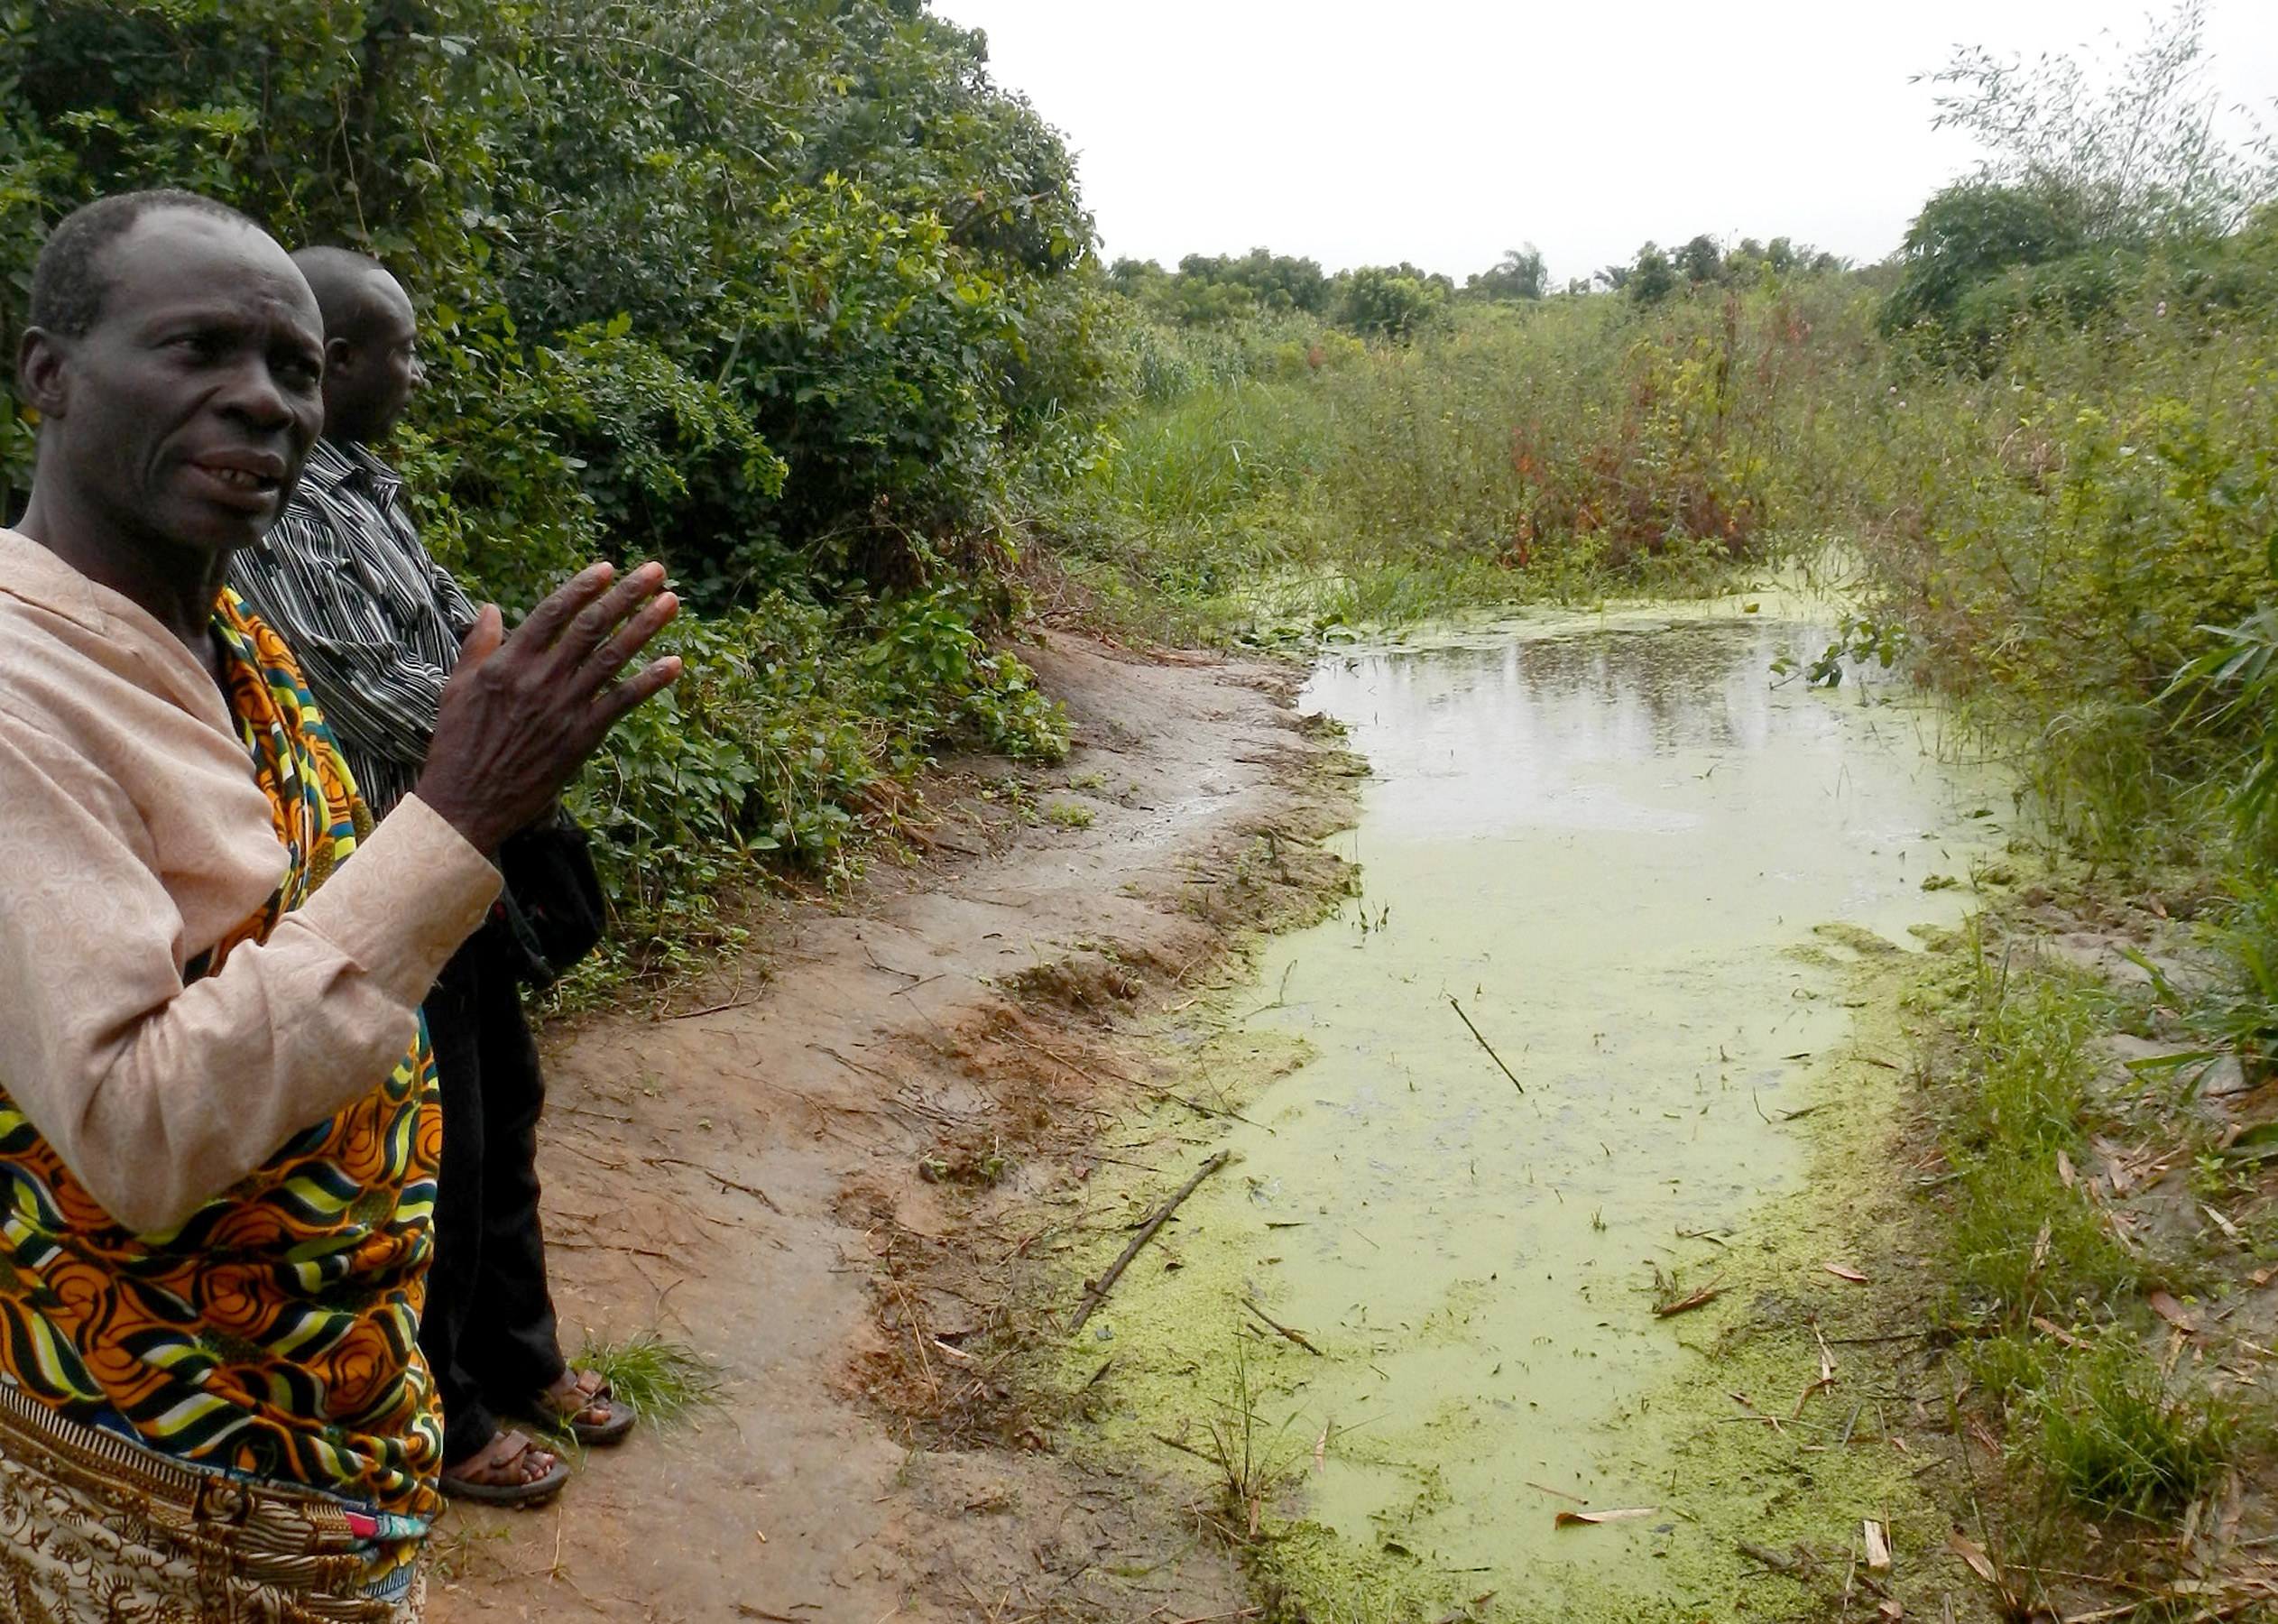 This filthy waterhole is the main source of water for the remote village of Doglokpo in Volta, Ghana.